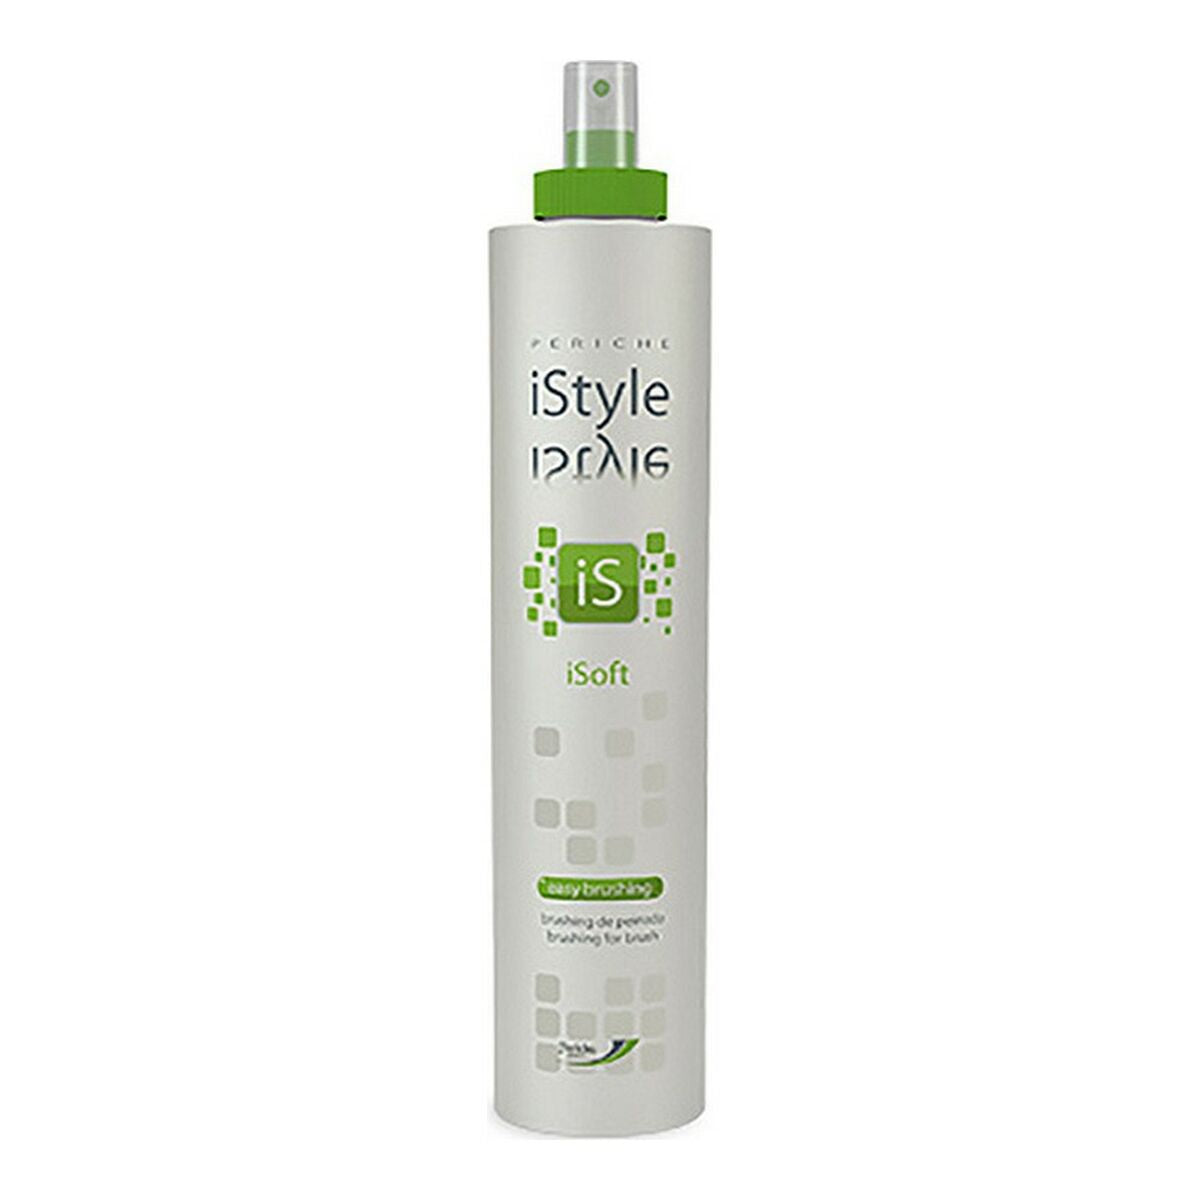 Stylingspray Periche Istyle Isoft Easy Brushing (250 ml)